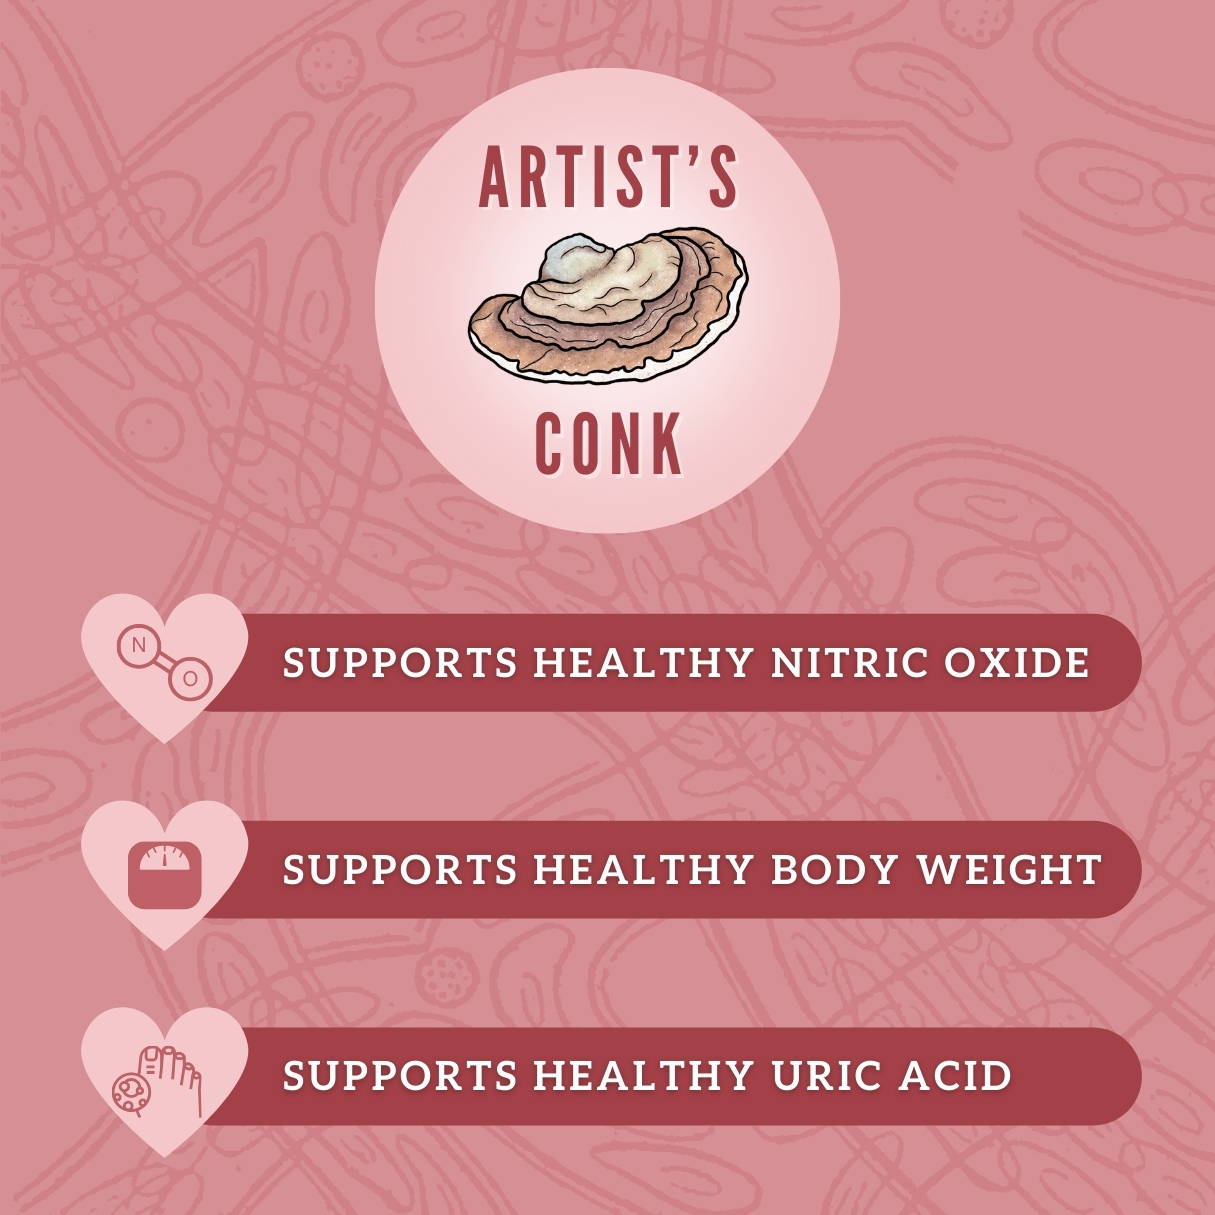 Artist's Conk mushroom infographic. Artist's Conk supports healthy nitric oxide, healthy body weight and healthy uric acid.